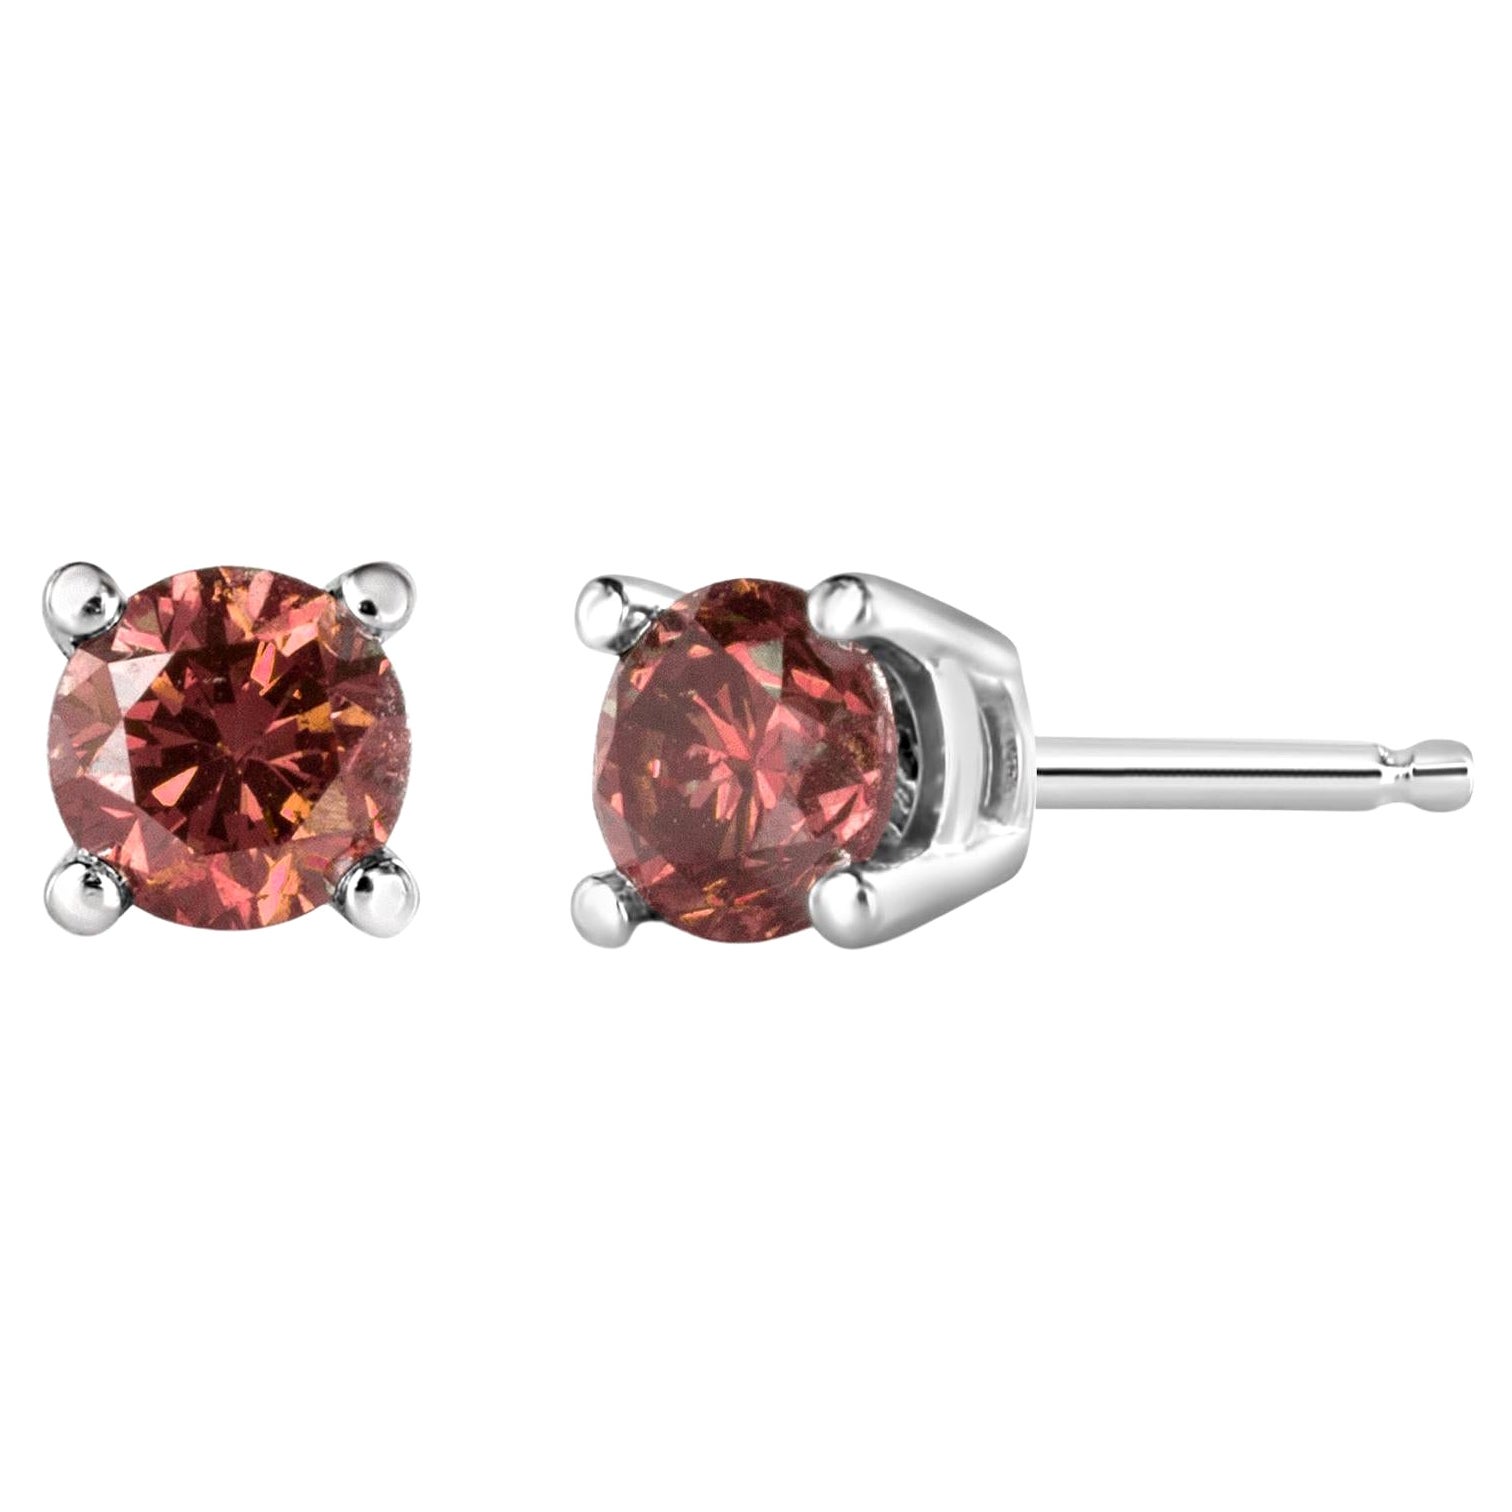 14K White Gold 1/4 Carat Round Brilliant-Cut Pink Diamond Solitaire Stud Earring